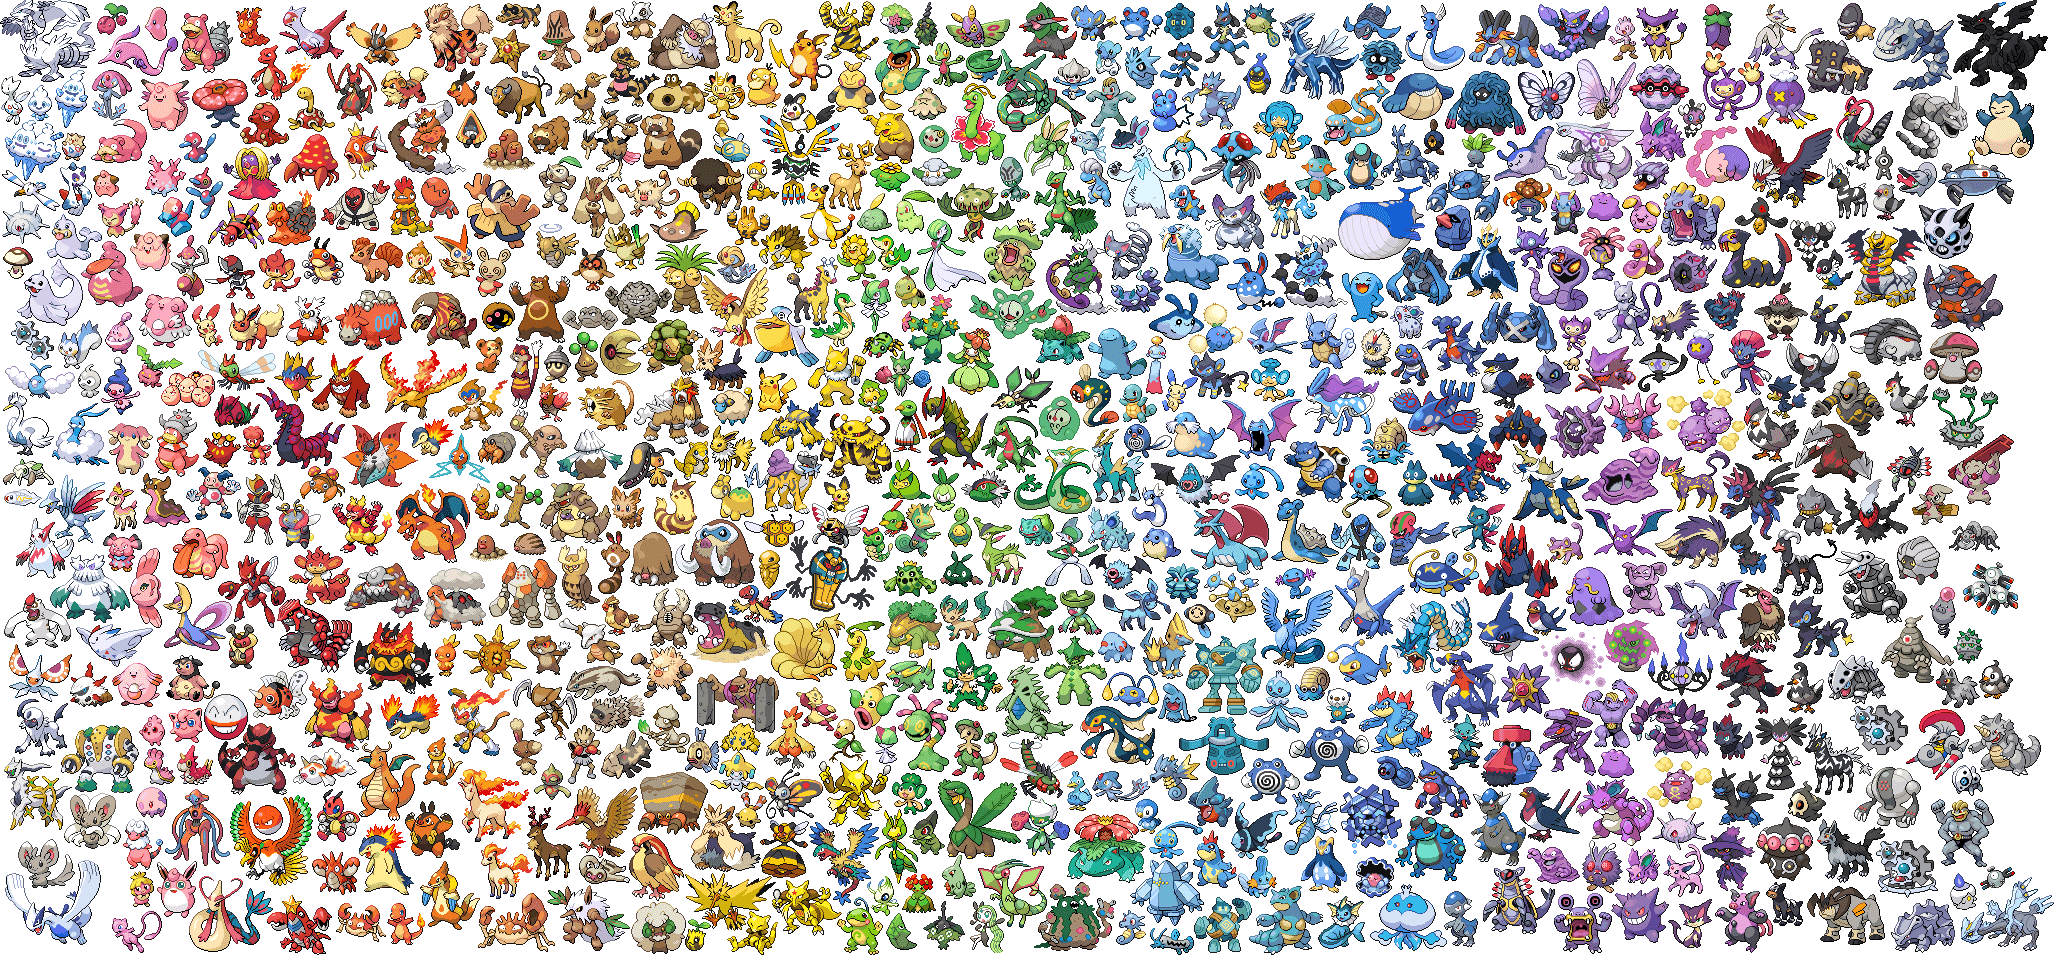 20+ Shiny Pokémon HD Wallpapers and Backgrounds